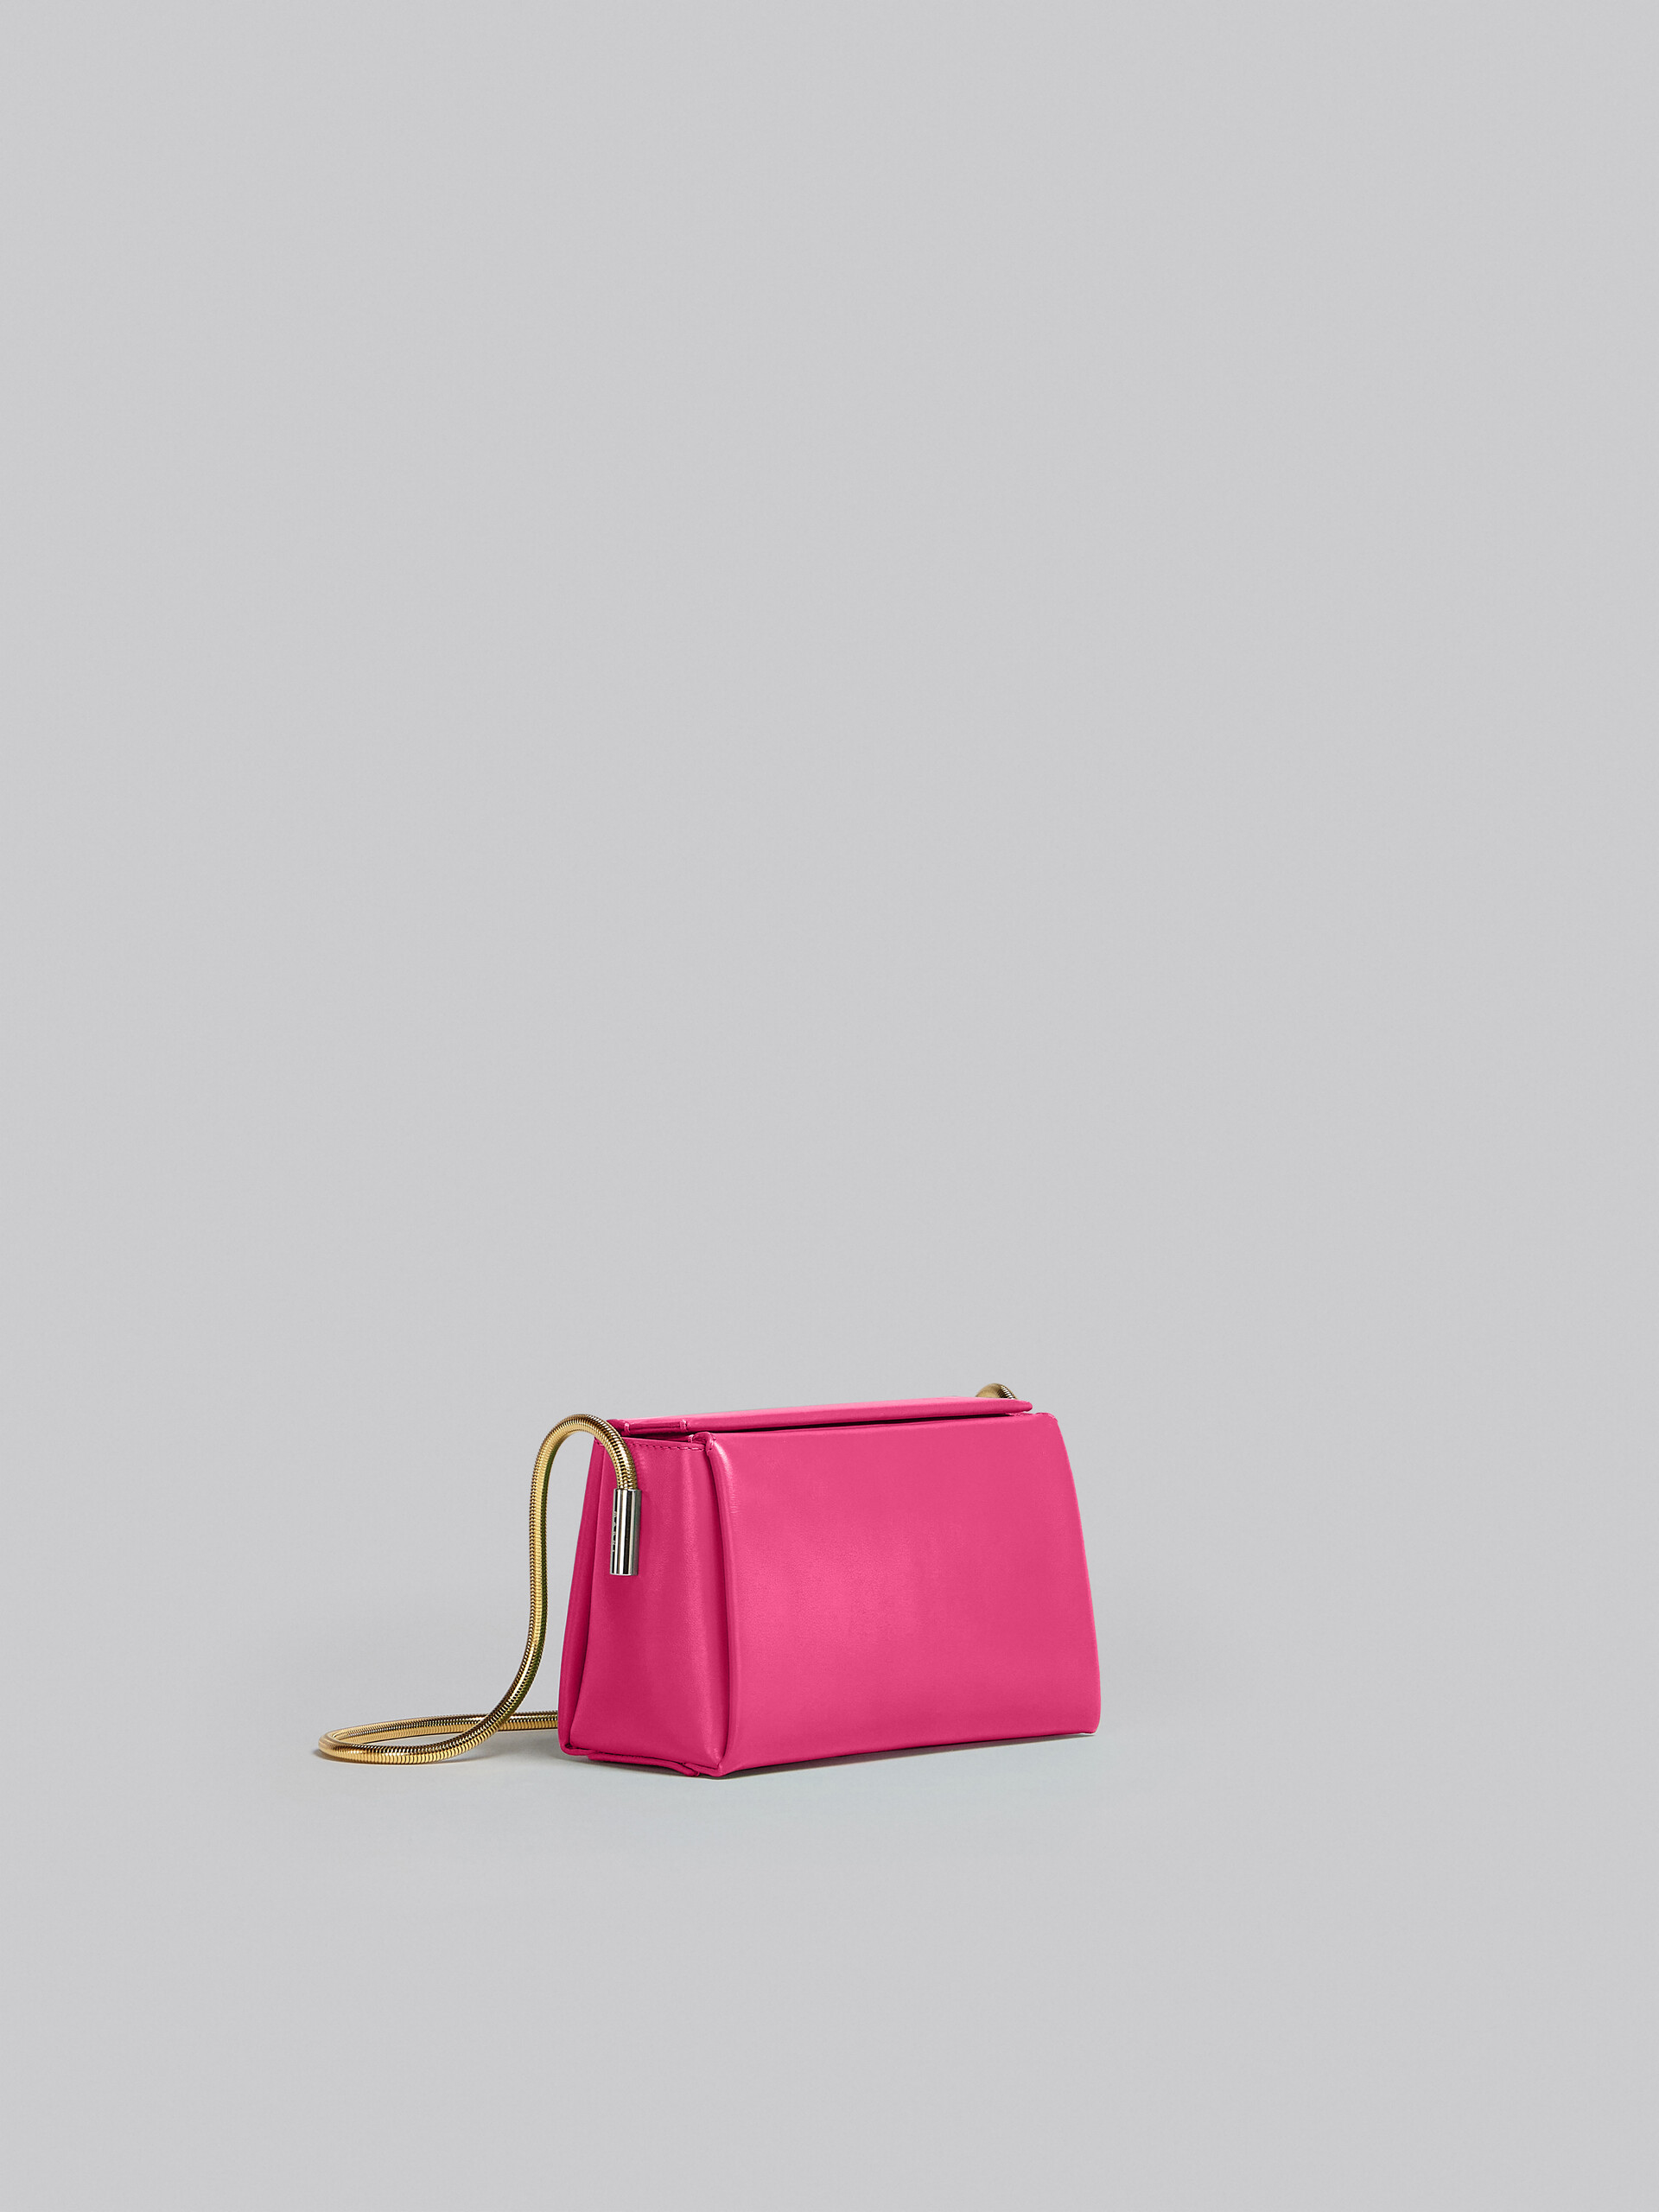 Toggle Small Bag in fuchsia leather - Shoulder Bag - Image 5